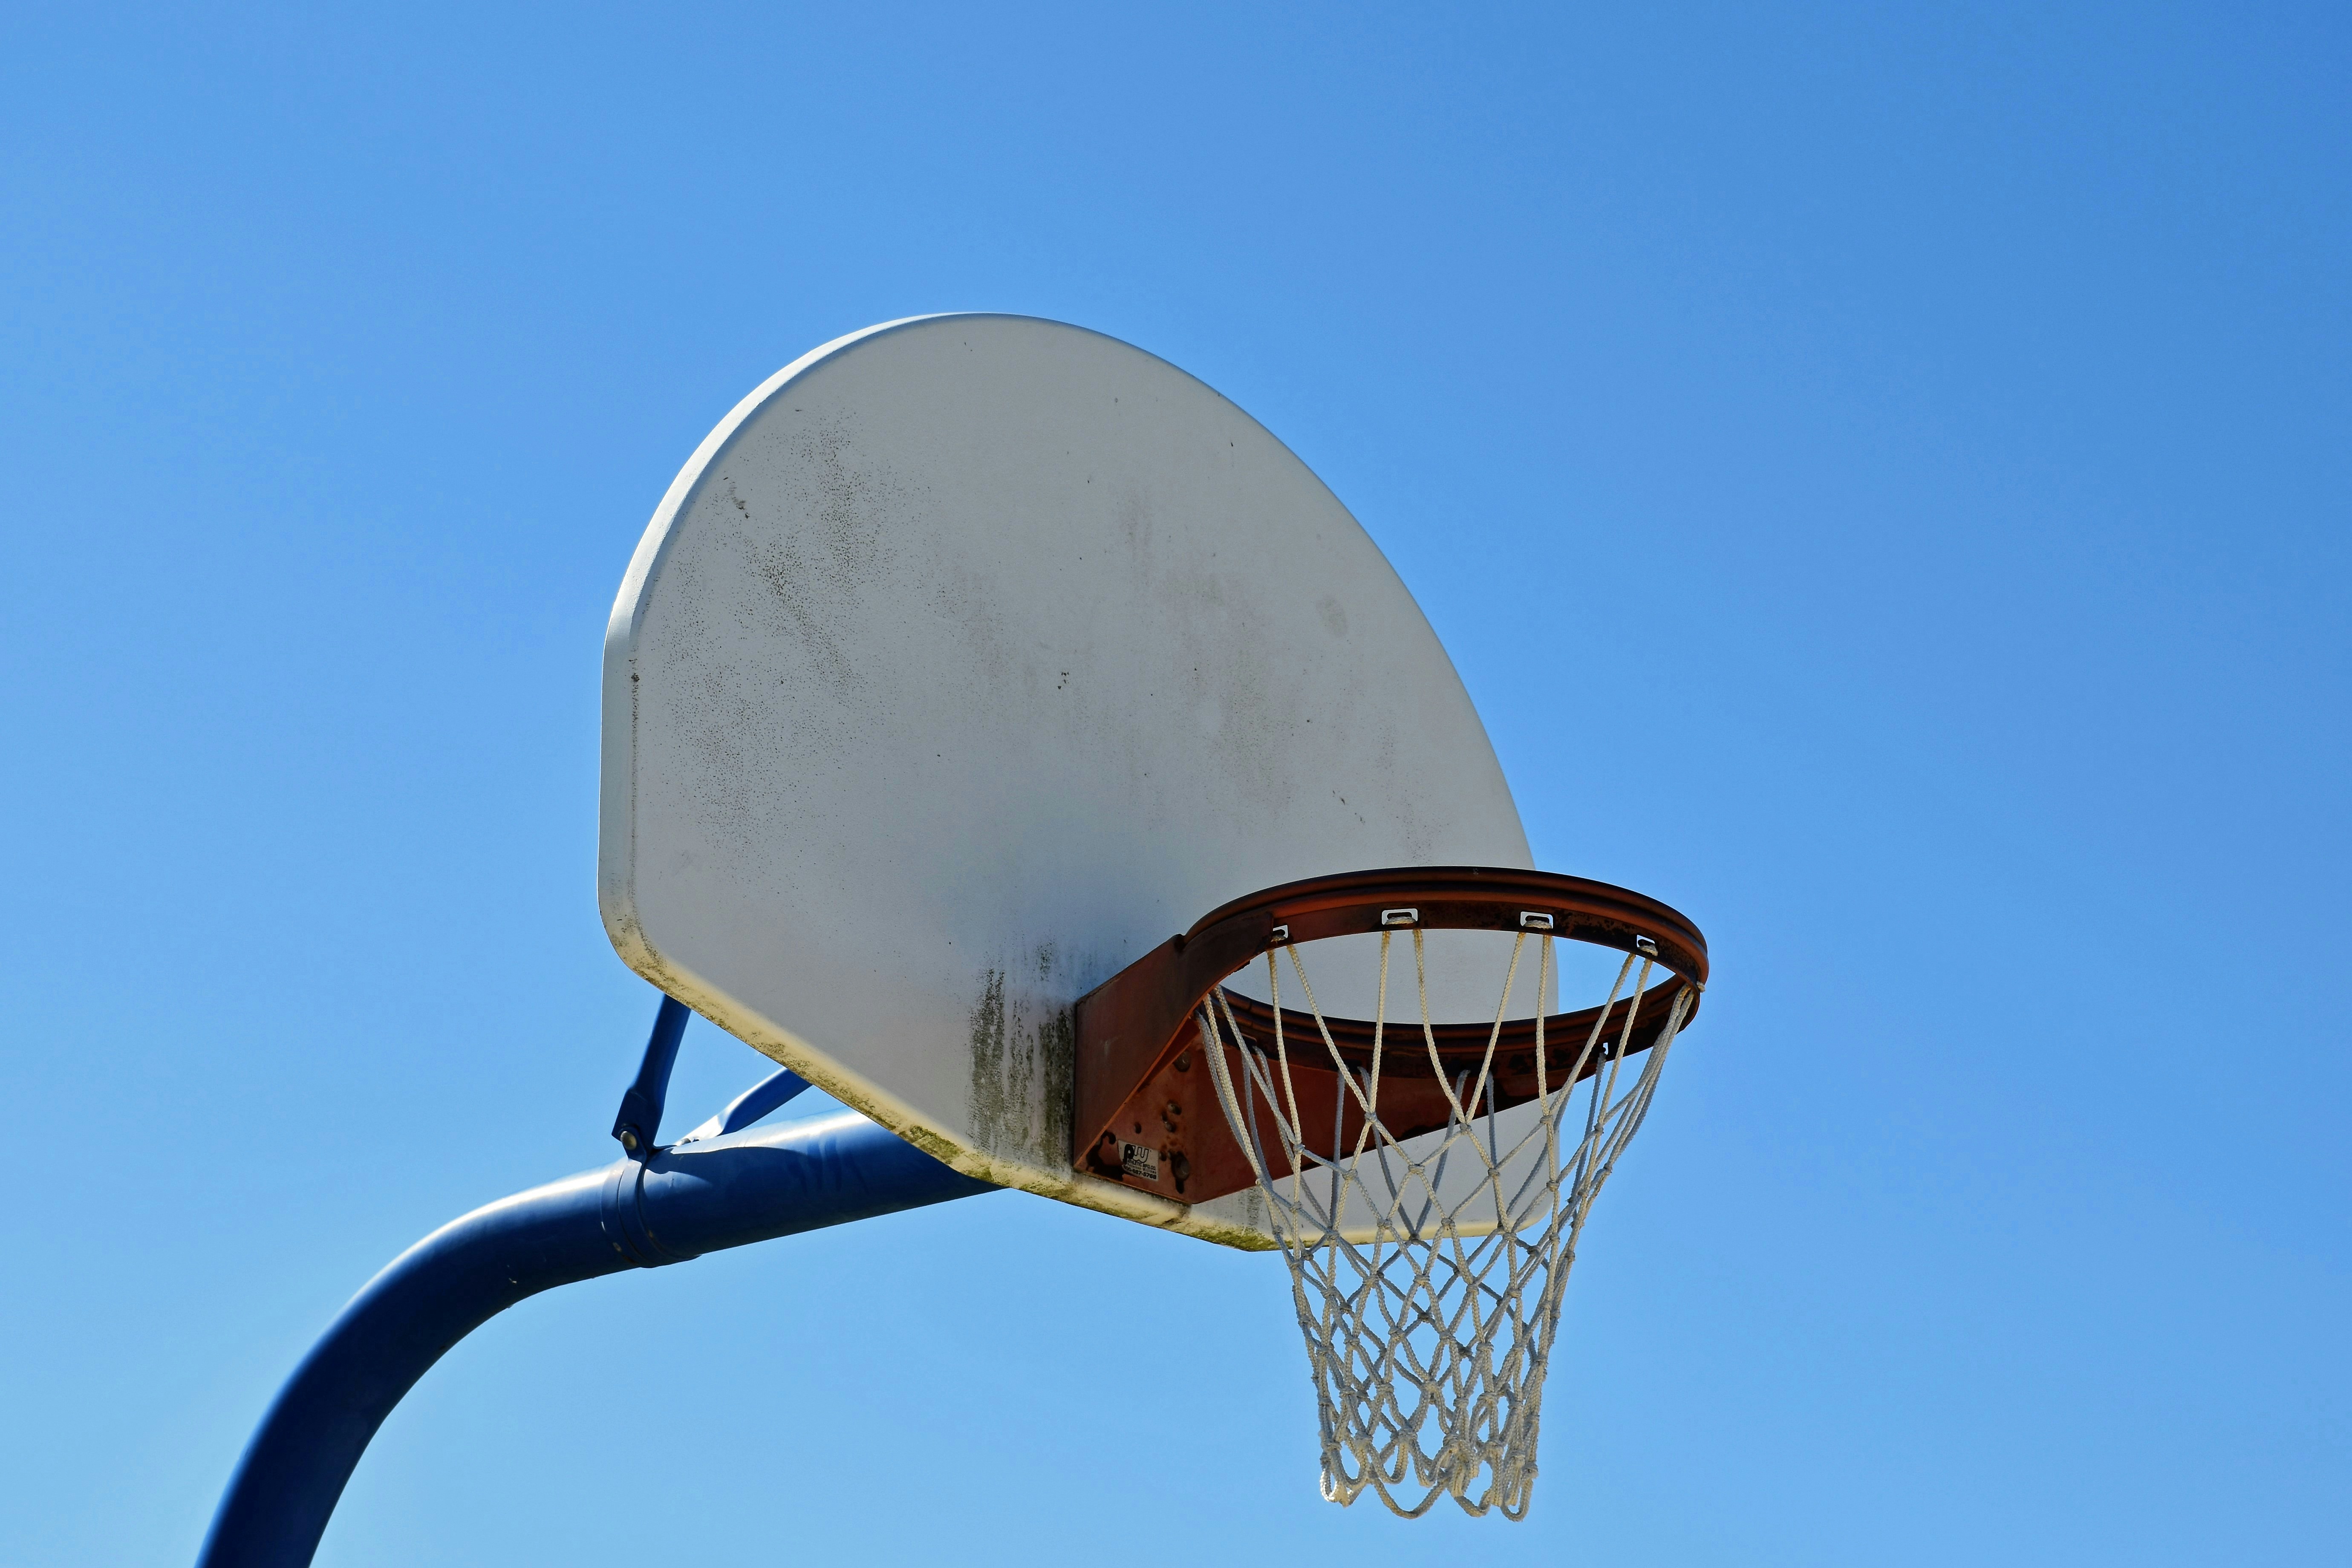 Outside basketball is fun. The photo shows a basketball hoop, net, and backboard against a clear sky.